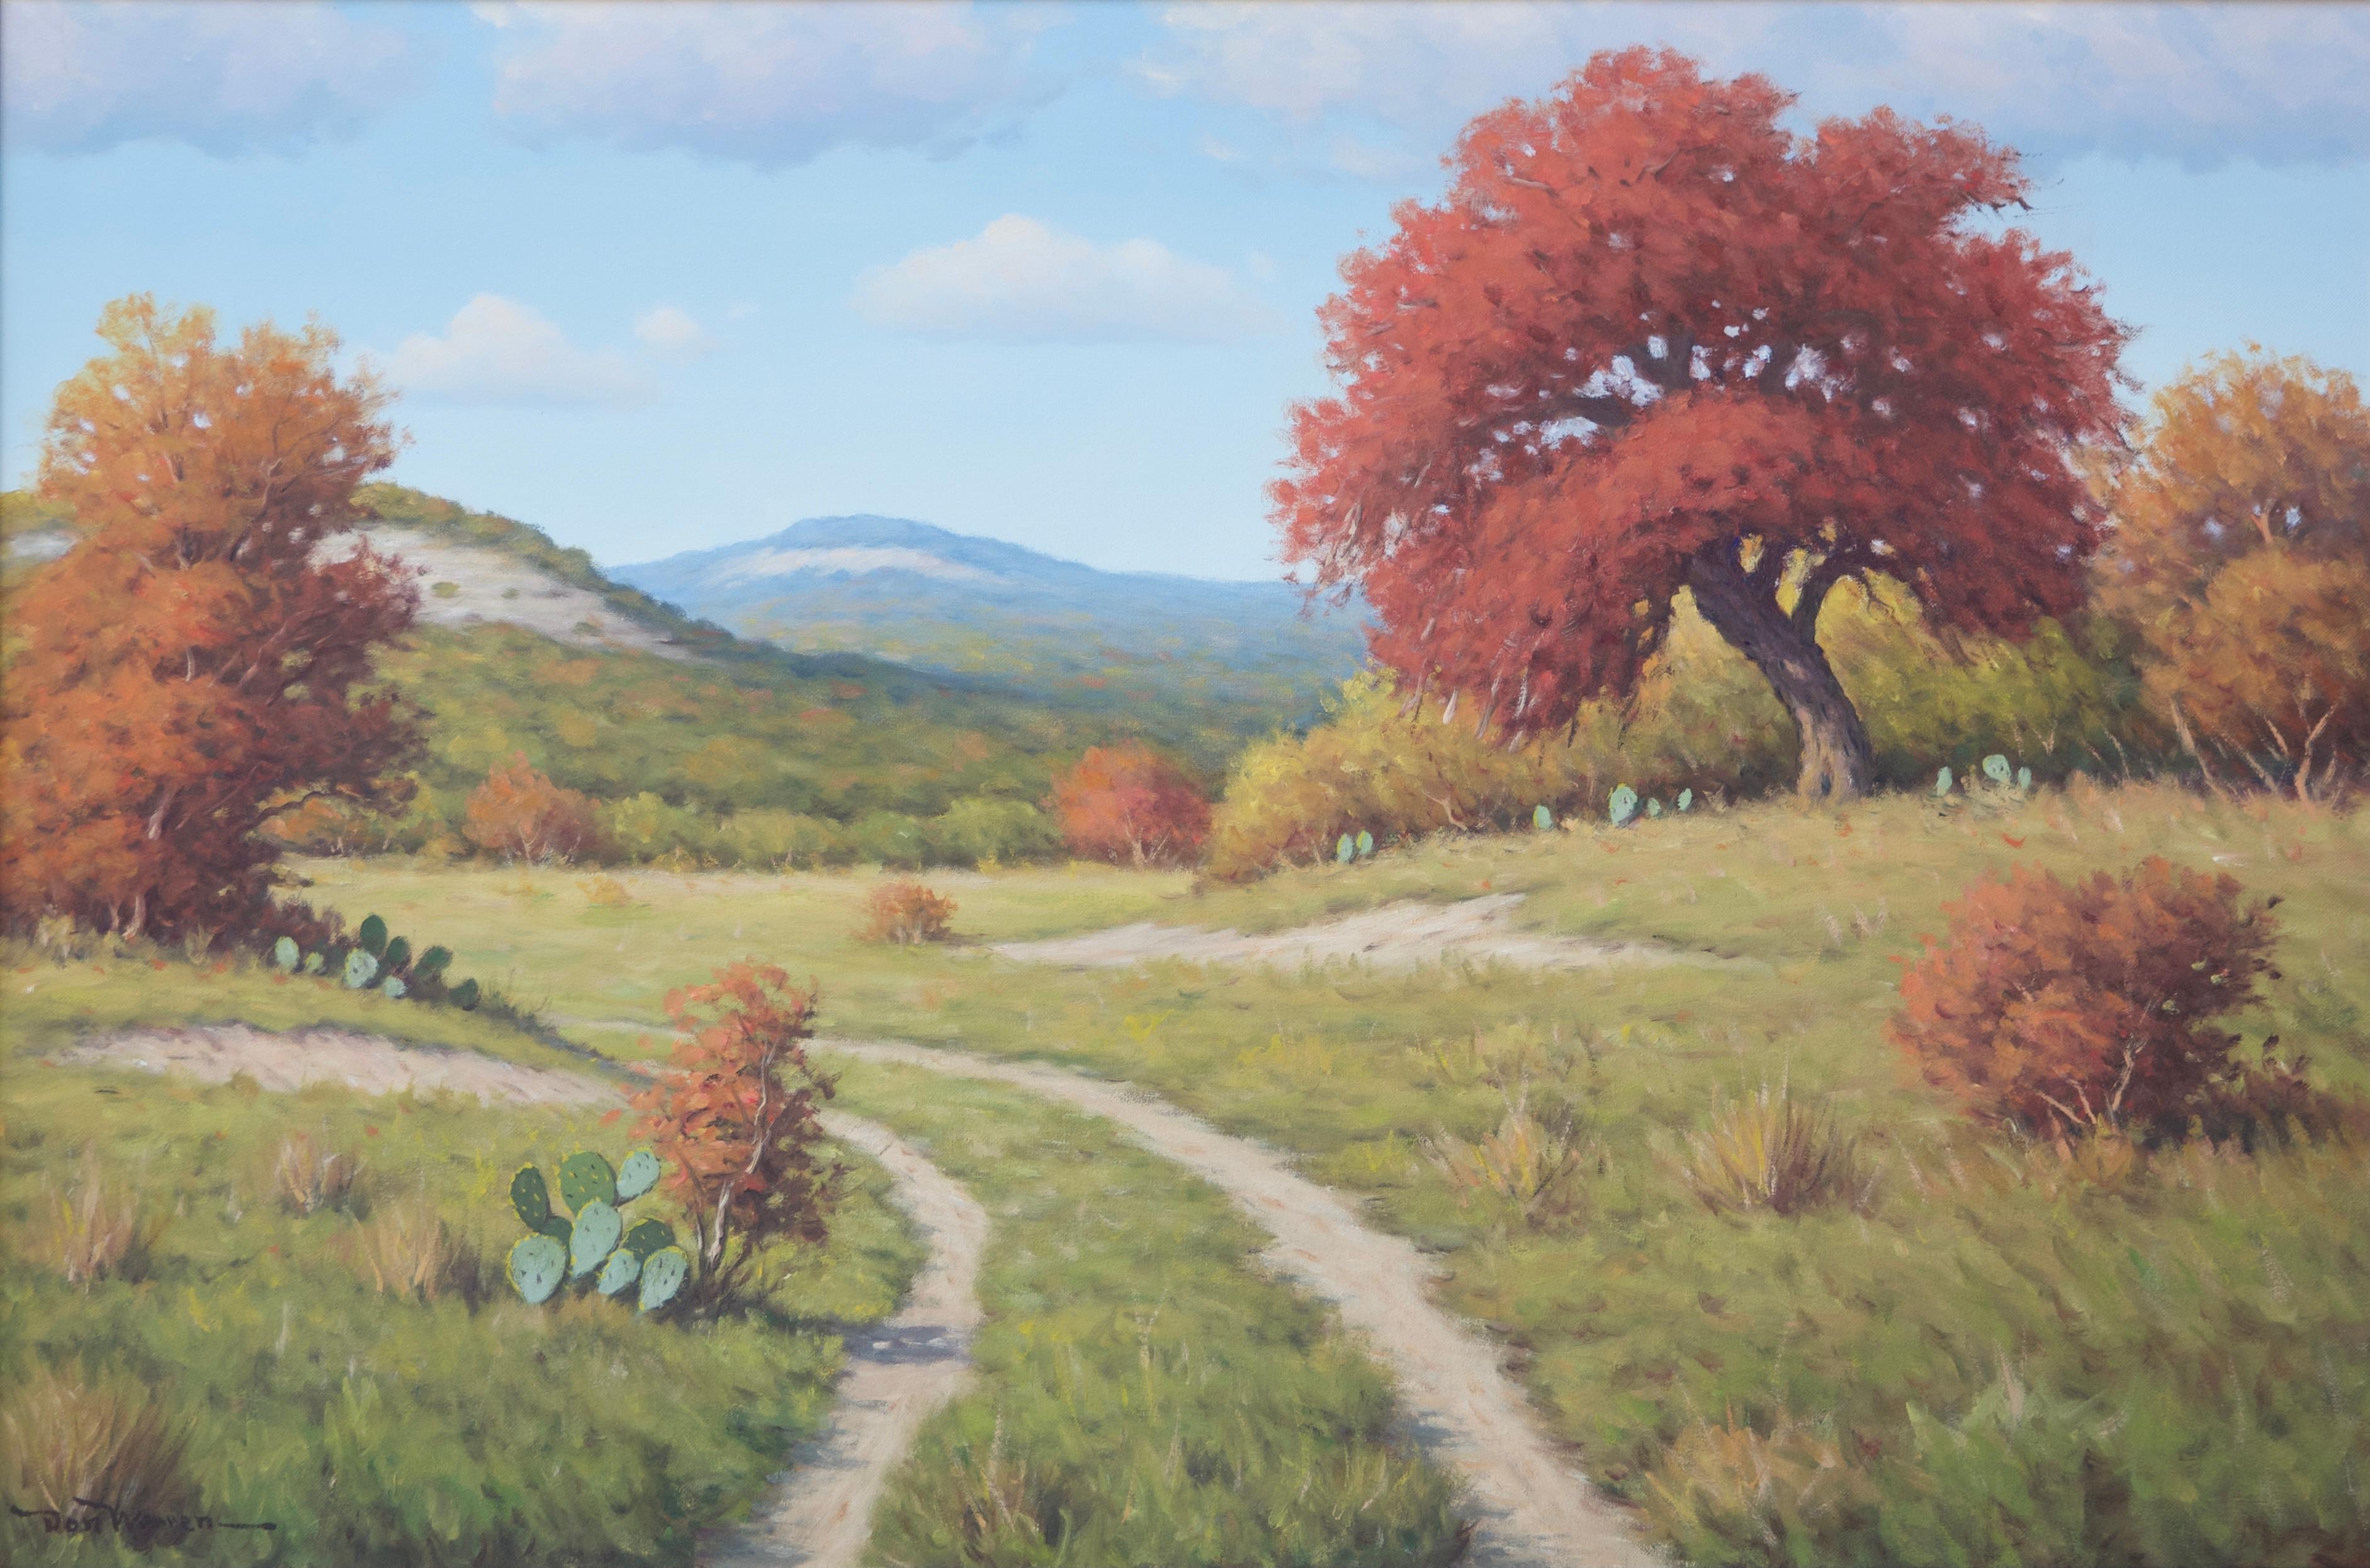 Don Warren Landscape Painting - Hill Country Landscape - Autumn Trees and Wheel Ruts